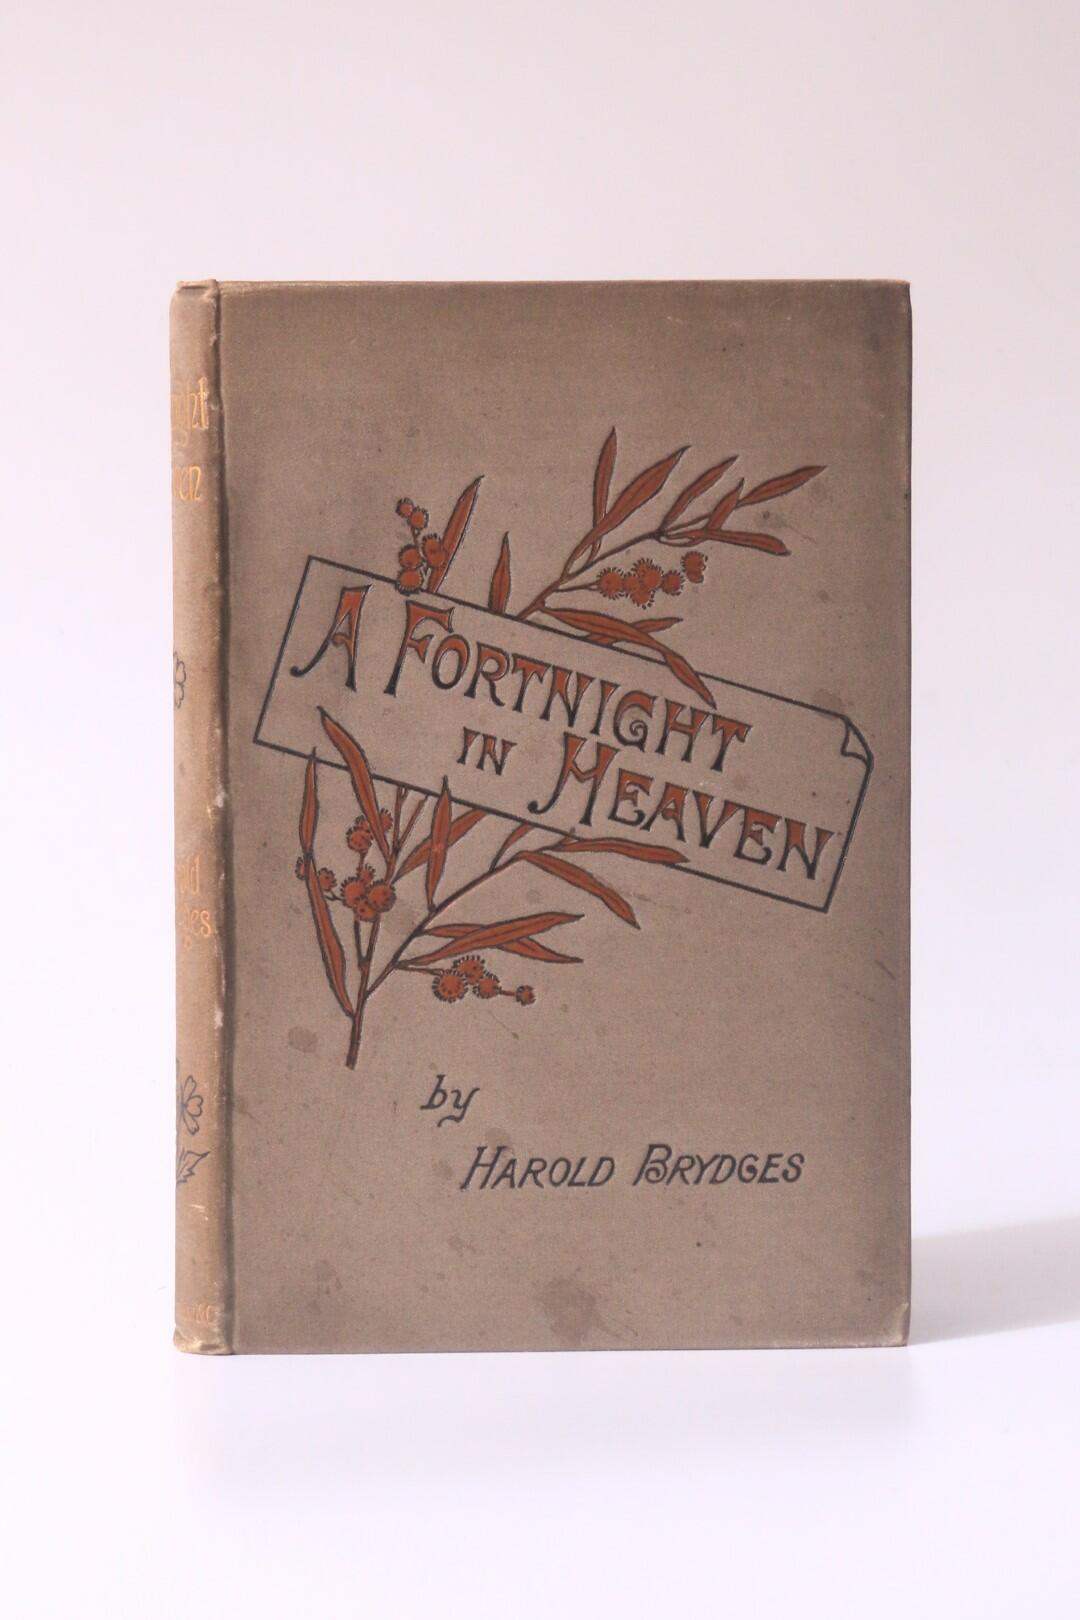 Harold Brydges [pseudonym James Howard Bridge] - A Fortnight in Heaven - Henry Holt, 1886, First Edition.